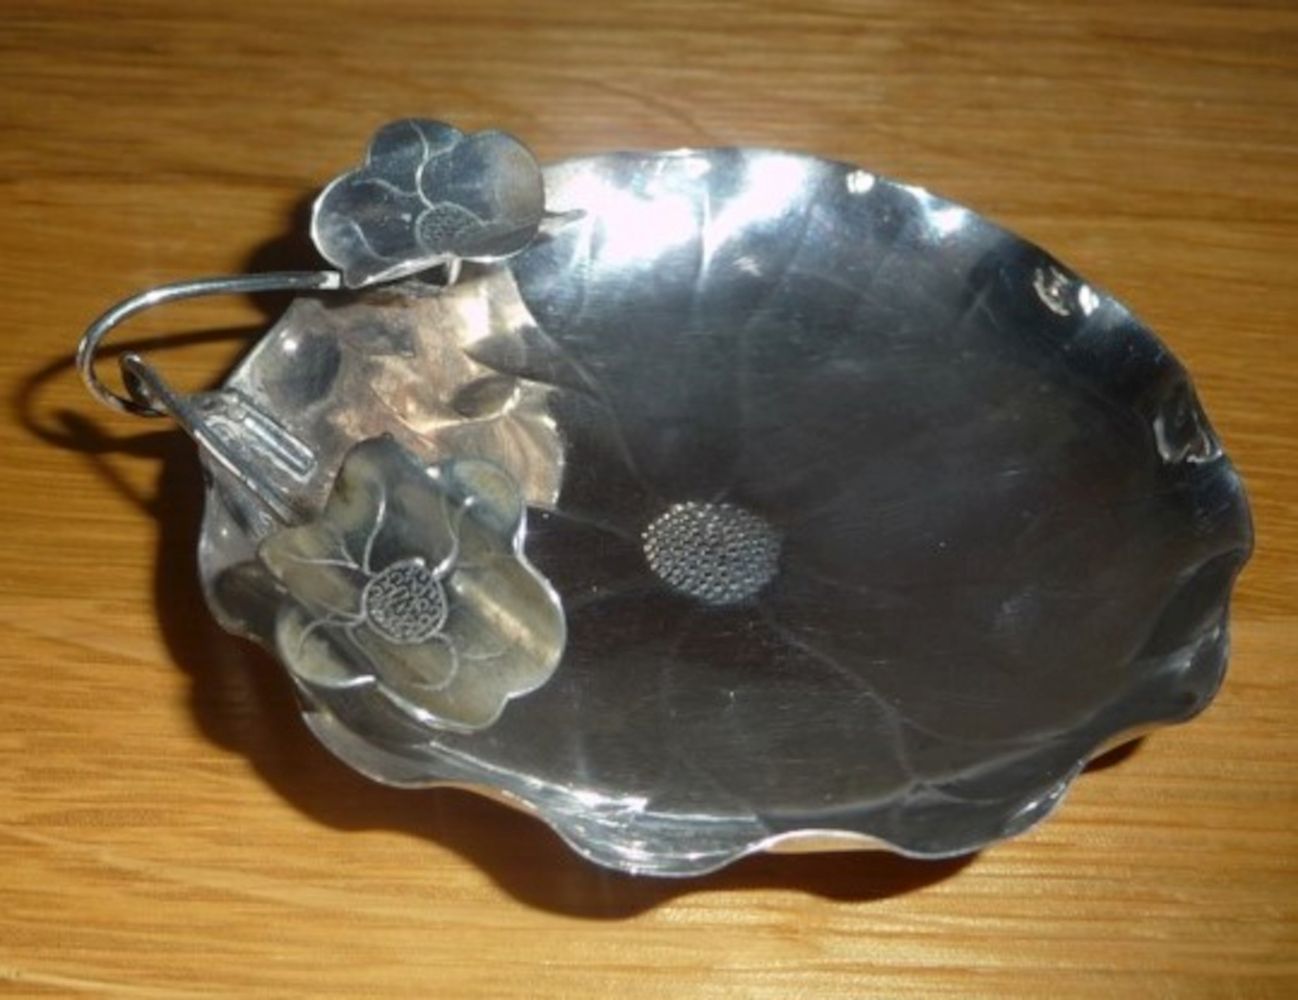 AN EARLY 20TH CENTURY CHINESE SILVER DISH IN THE FORM OF AN OPEN FLOWER, with two smaller flowers